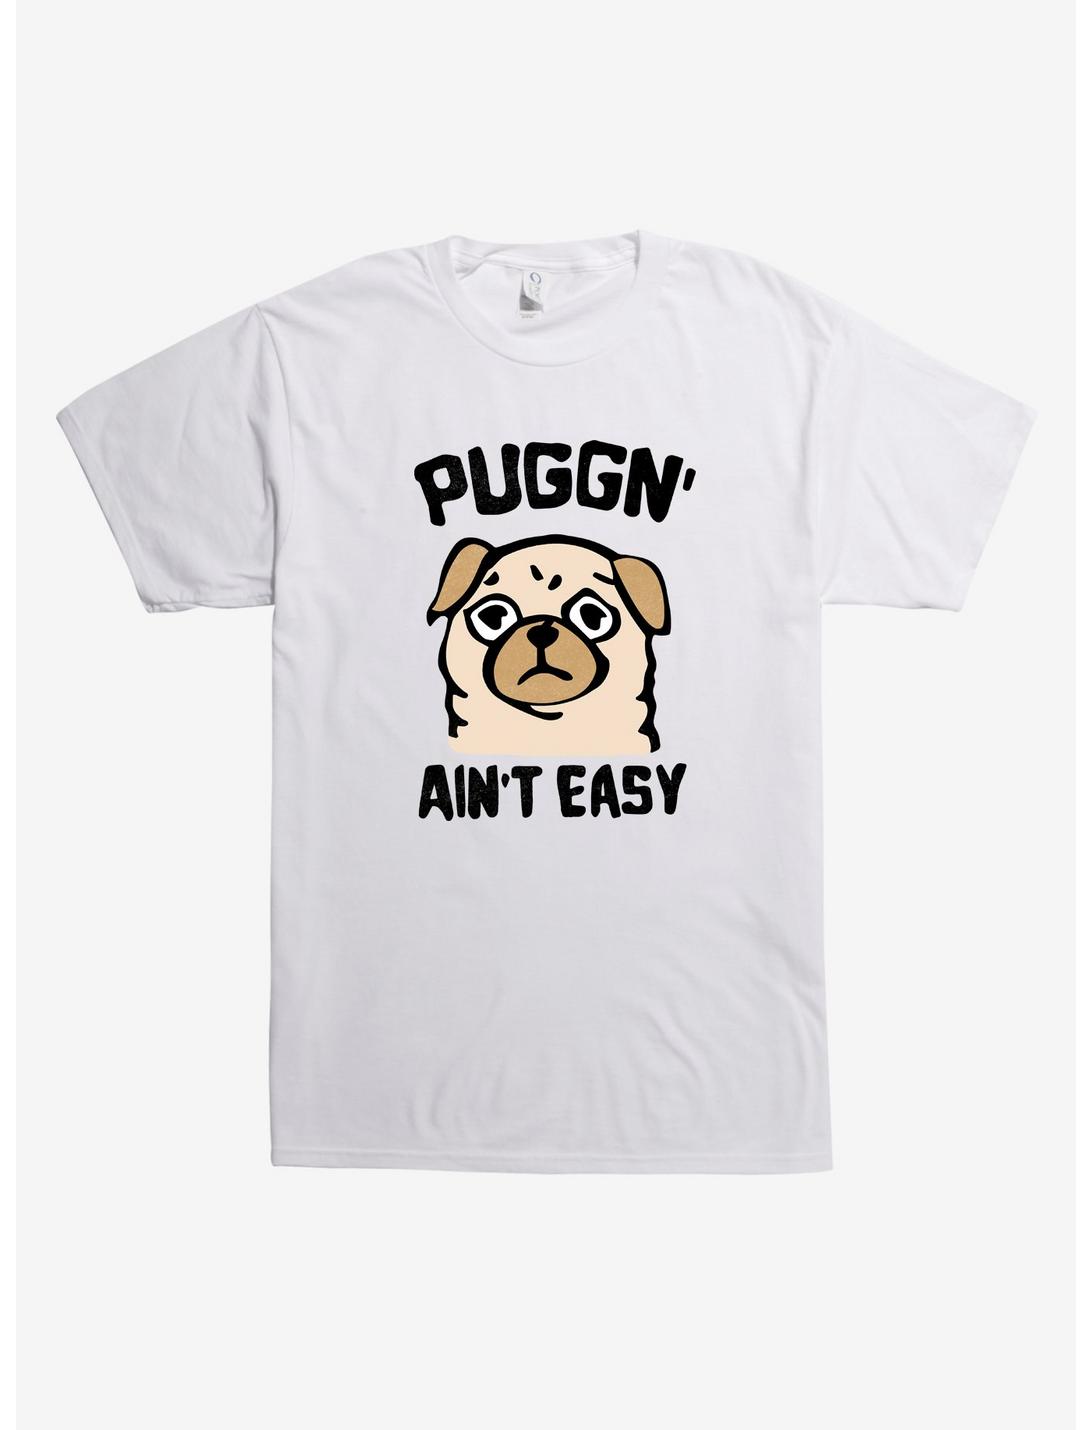 Puggn' Ain't Easy T-Shirt, WHITE, hi-res